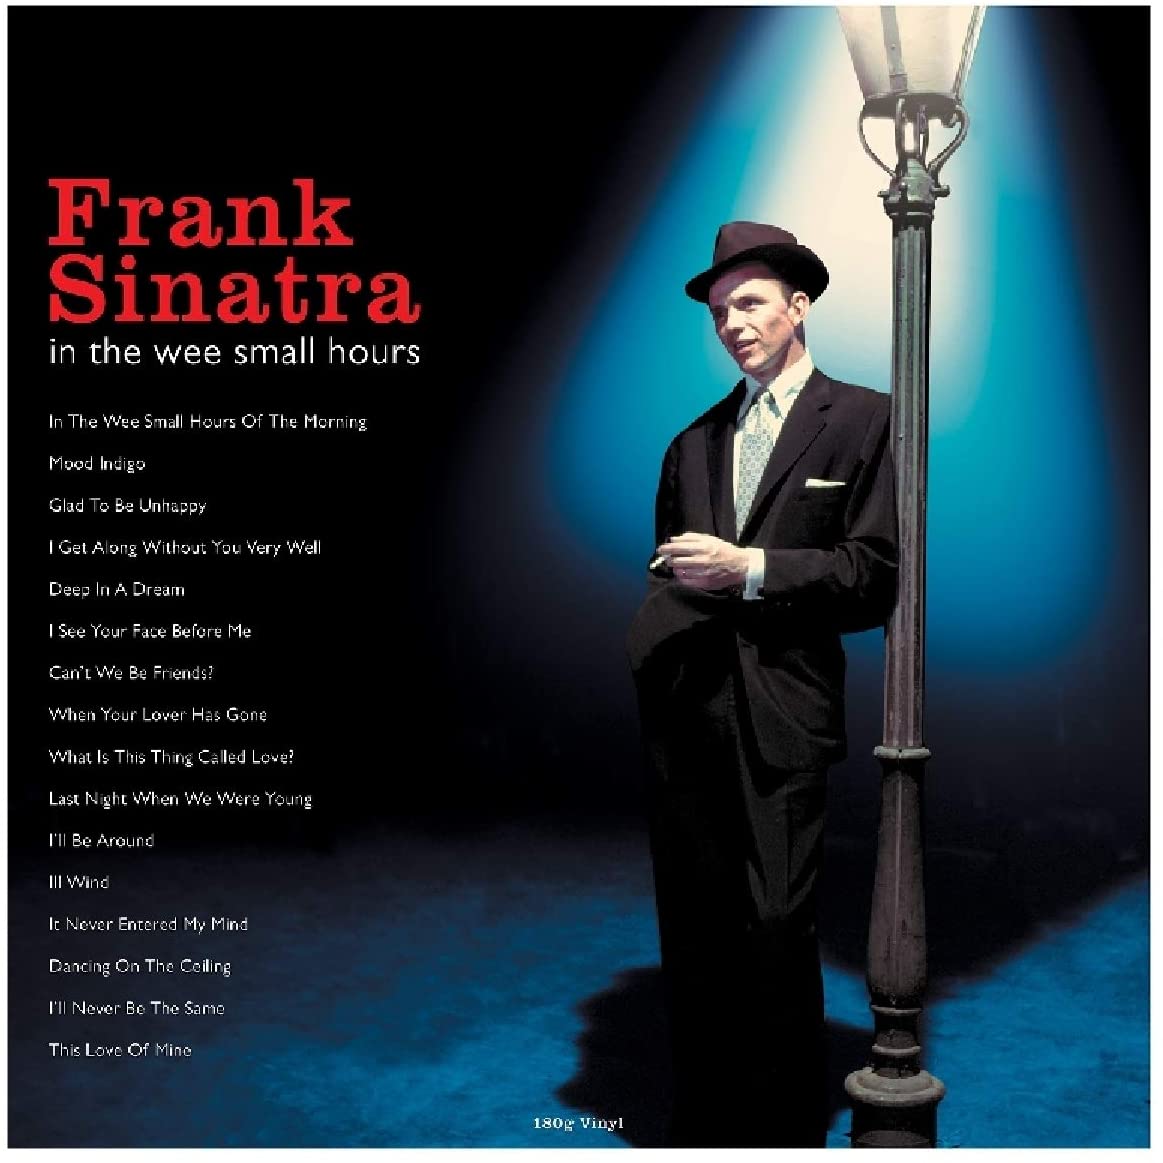 Frank Sinatra In The Wee Small Hours - Ireland Vinyl